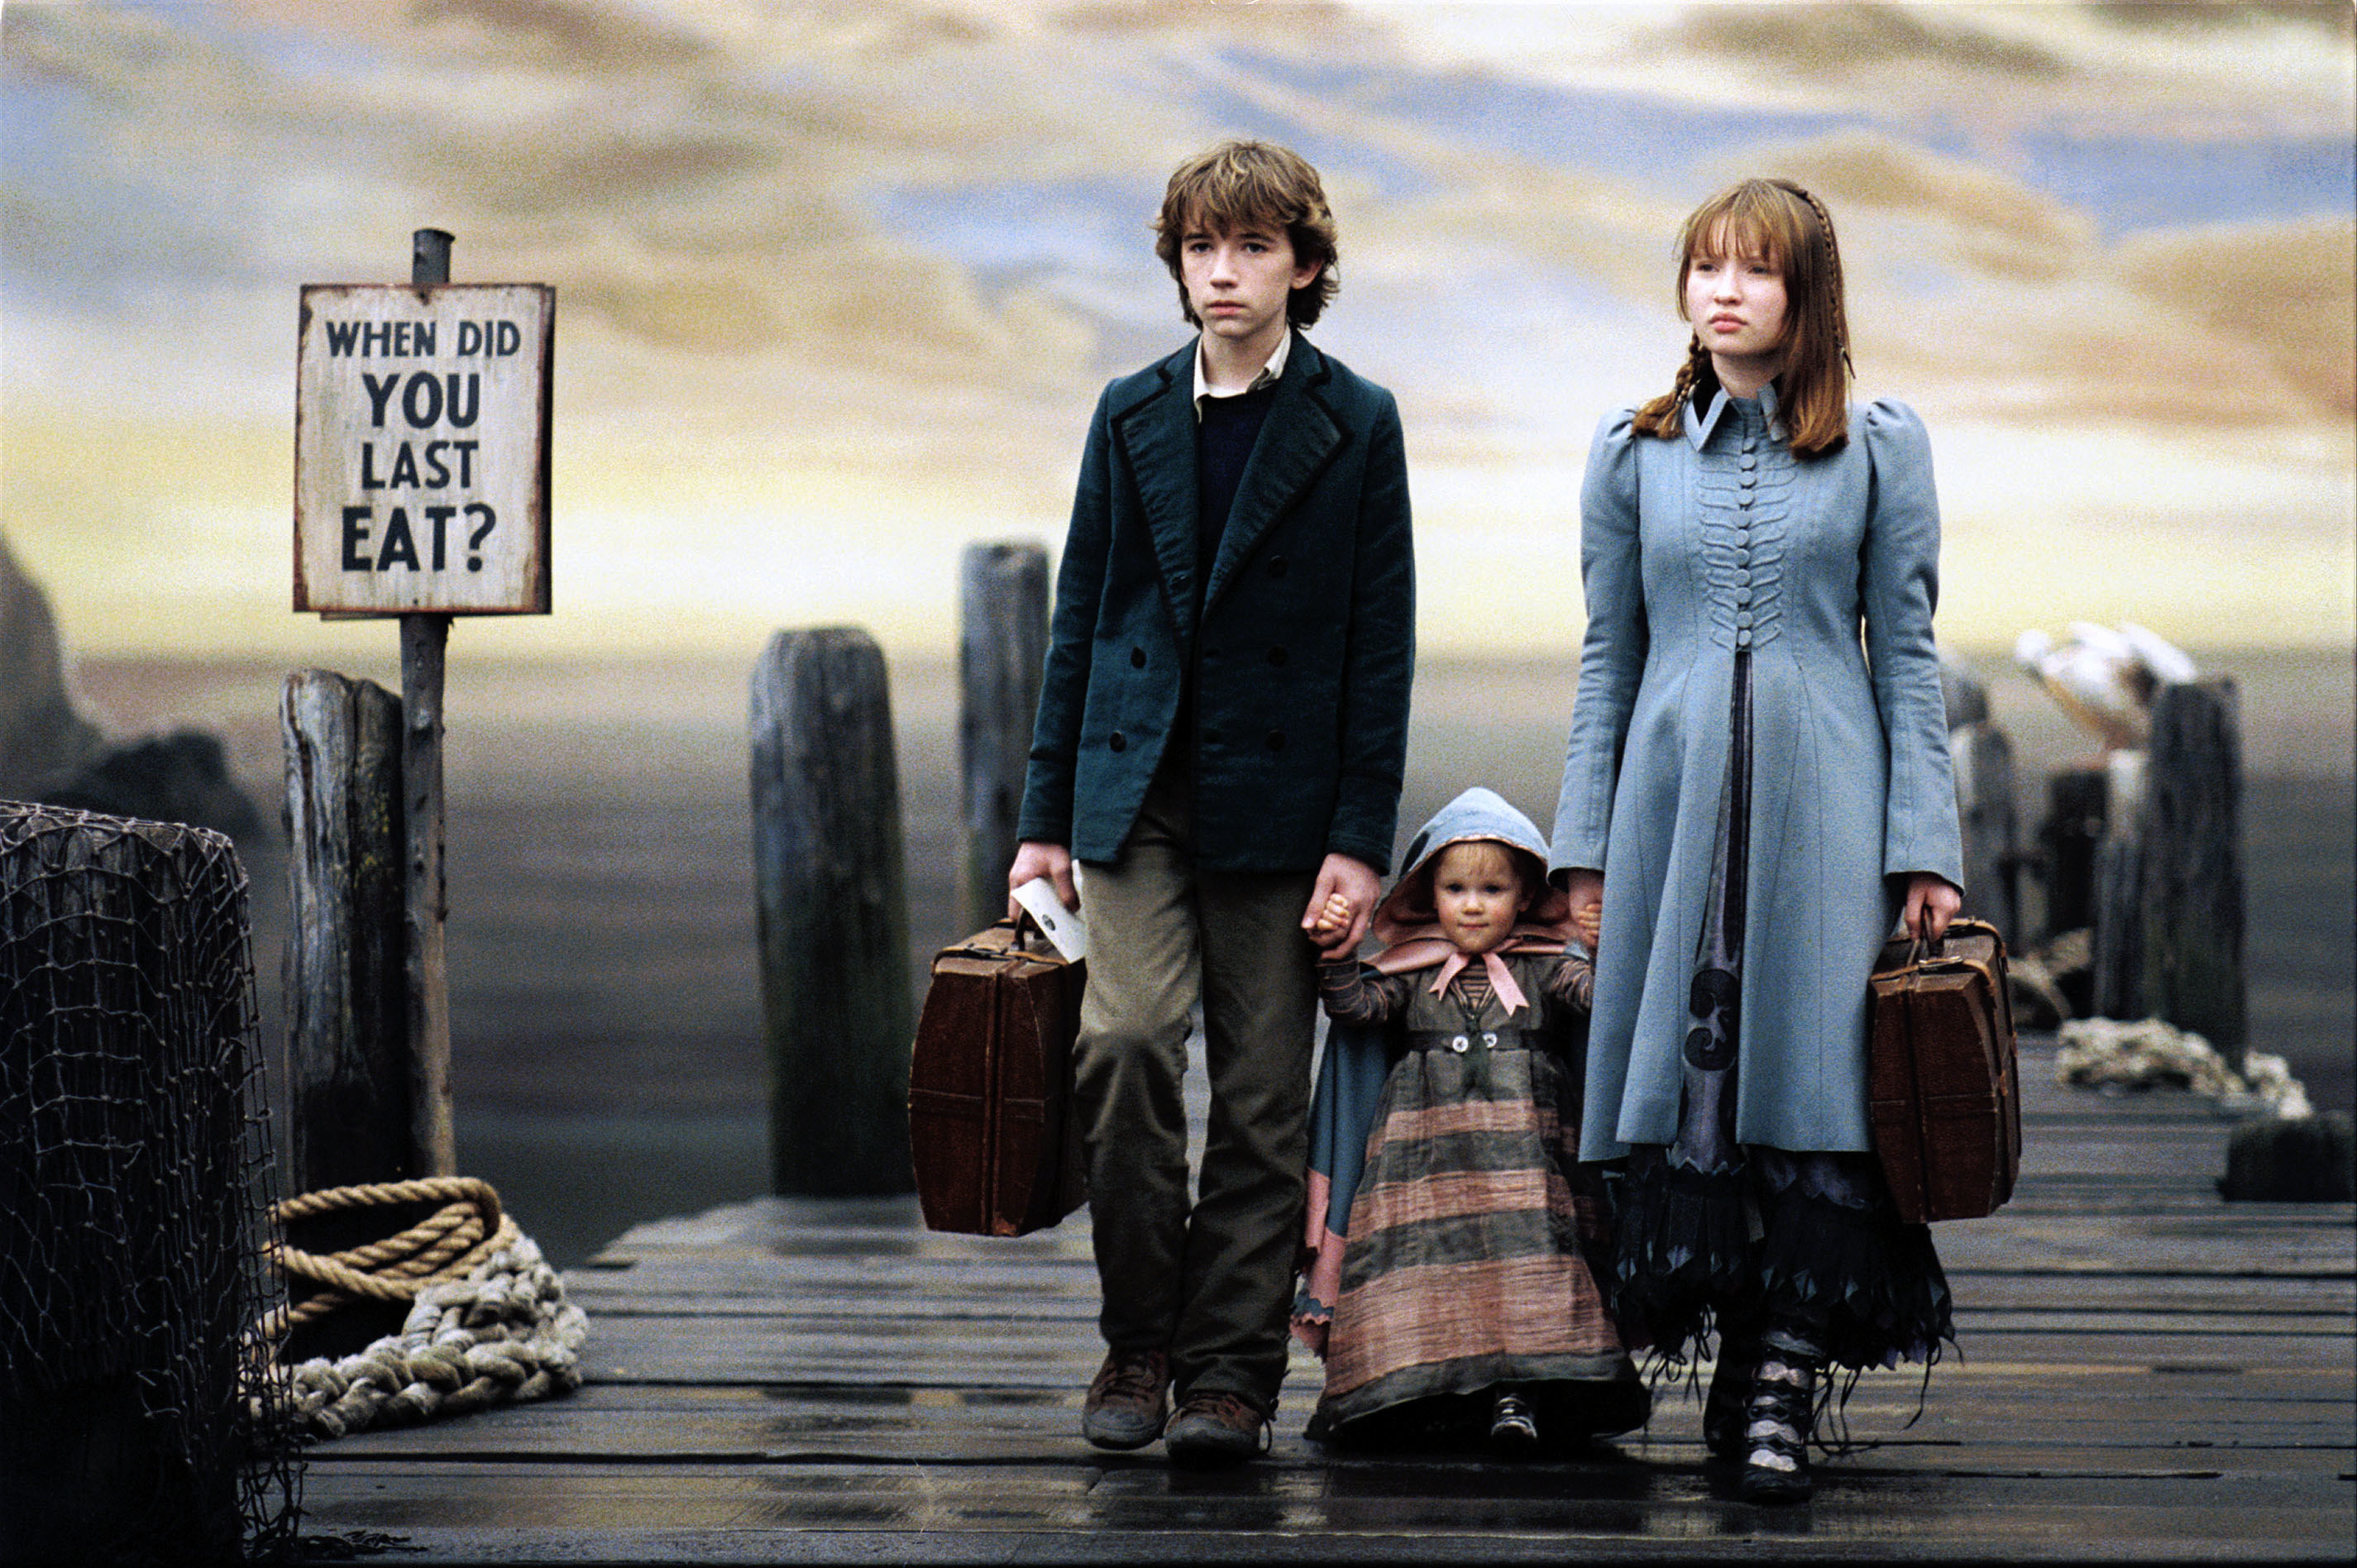 Liam Aiken, Kara/Shelby Hoffman, and Emily Browning holding hands while walking on a dock.